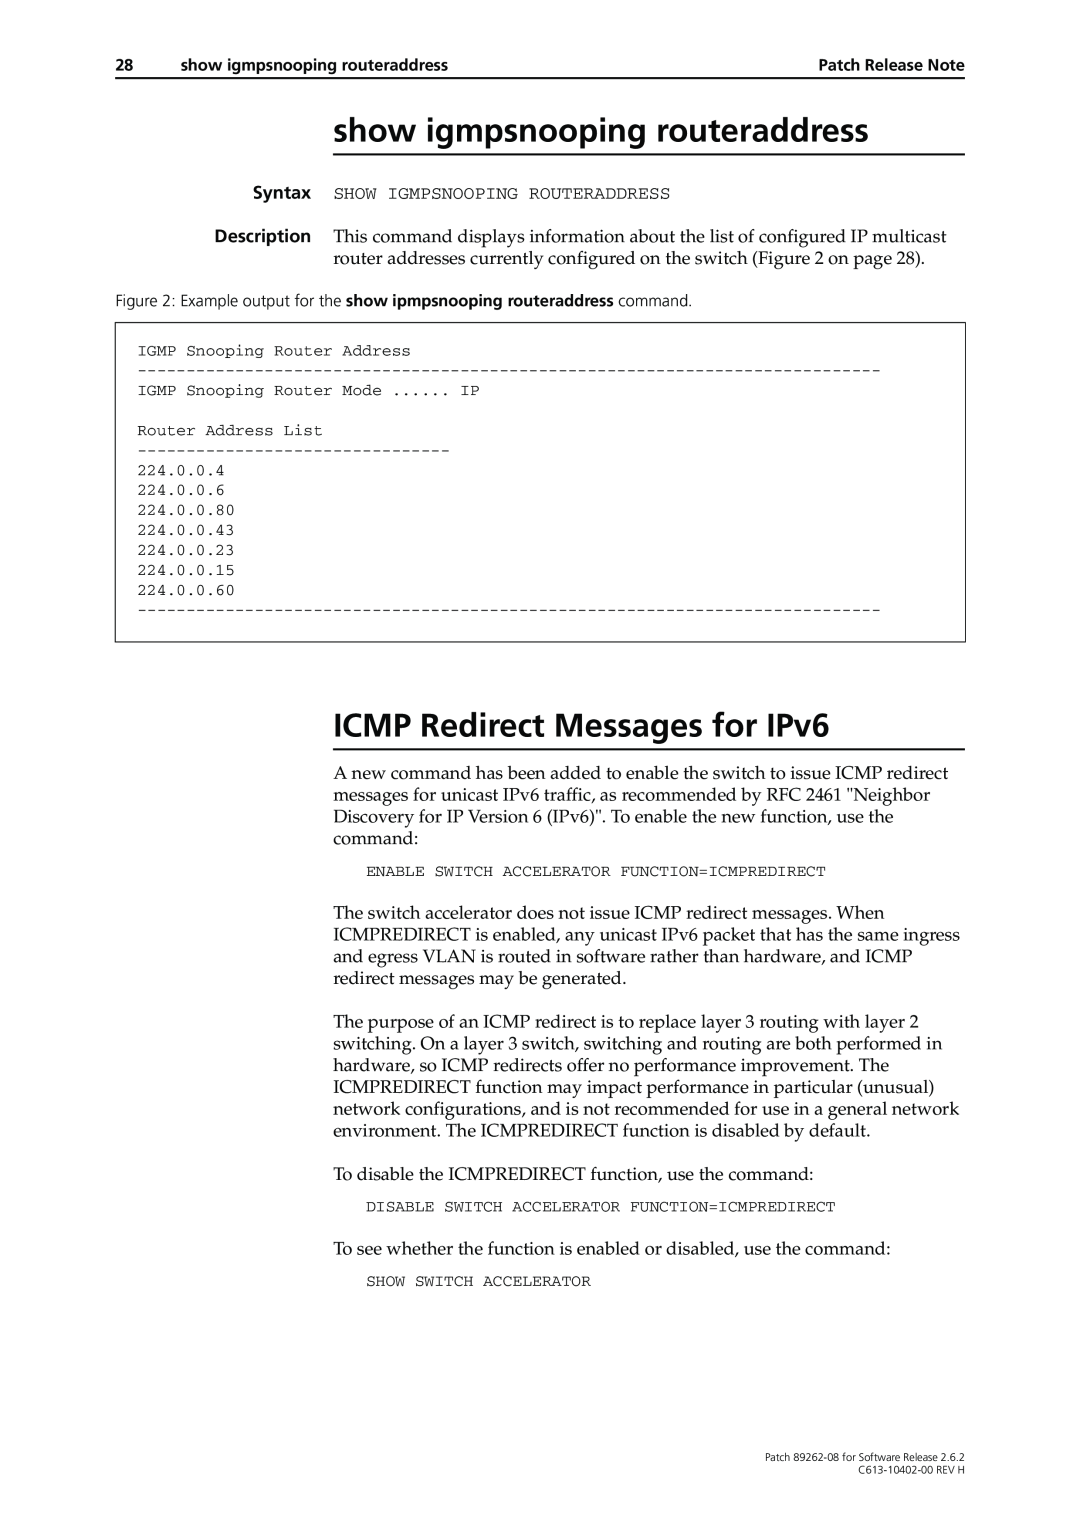 Allied Telesis Patch 89262-08 manual show igmpsnooping routeraddress, ICMP Redirect Messages for IPv6 